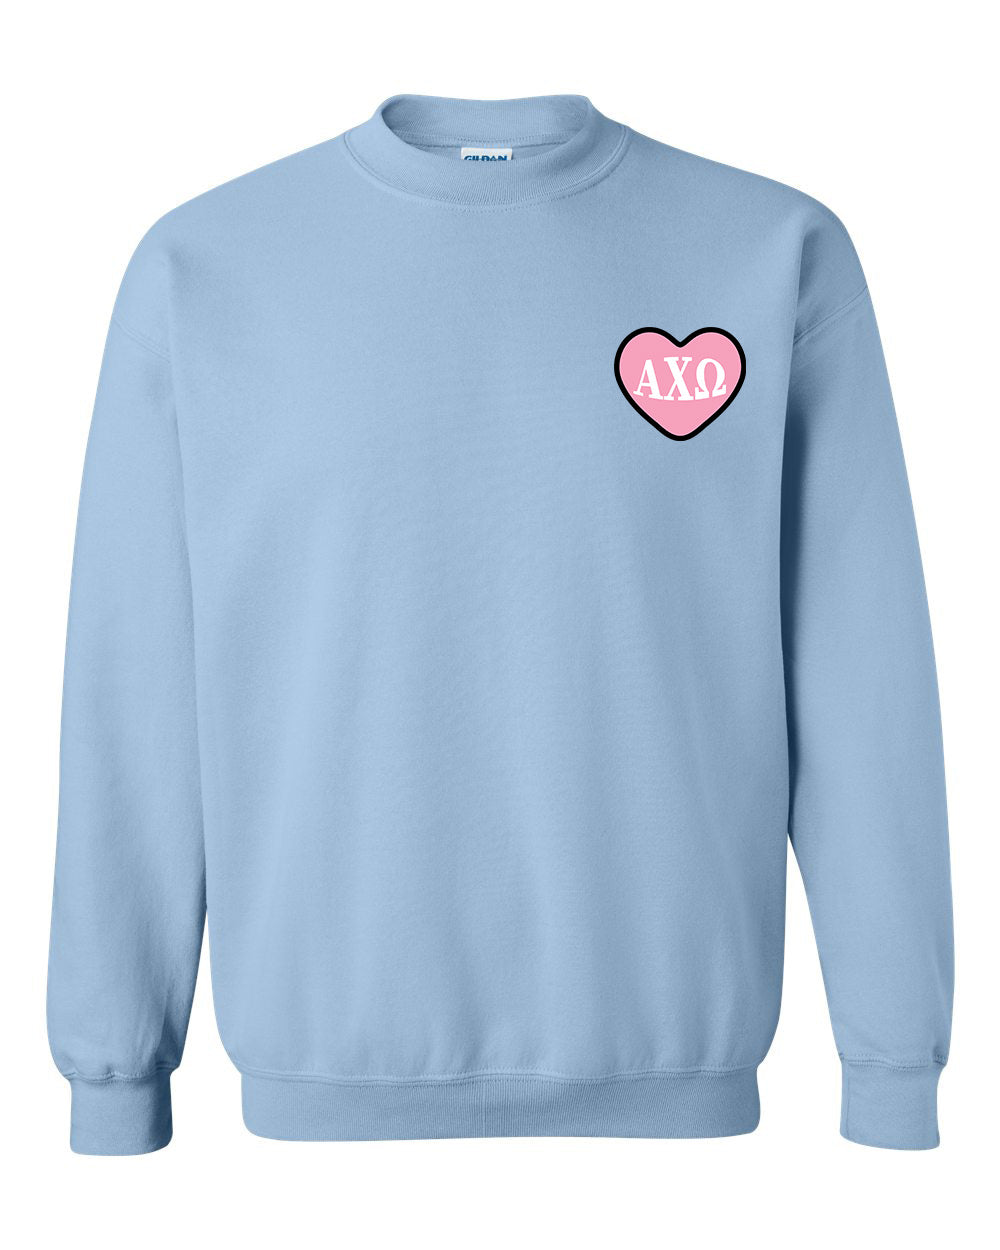 a light blue sweatshirt with a pink heart on the chest